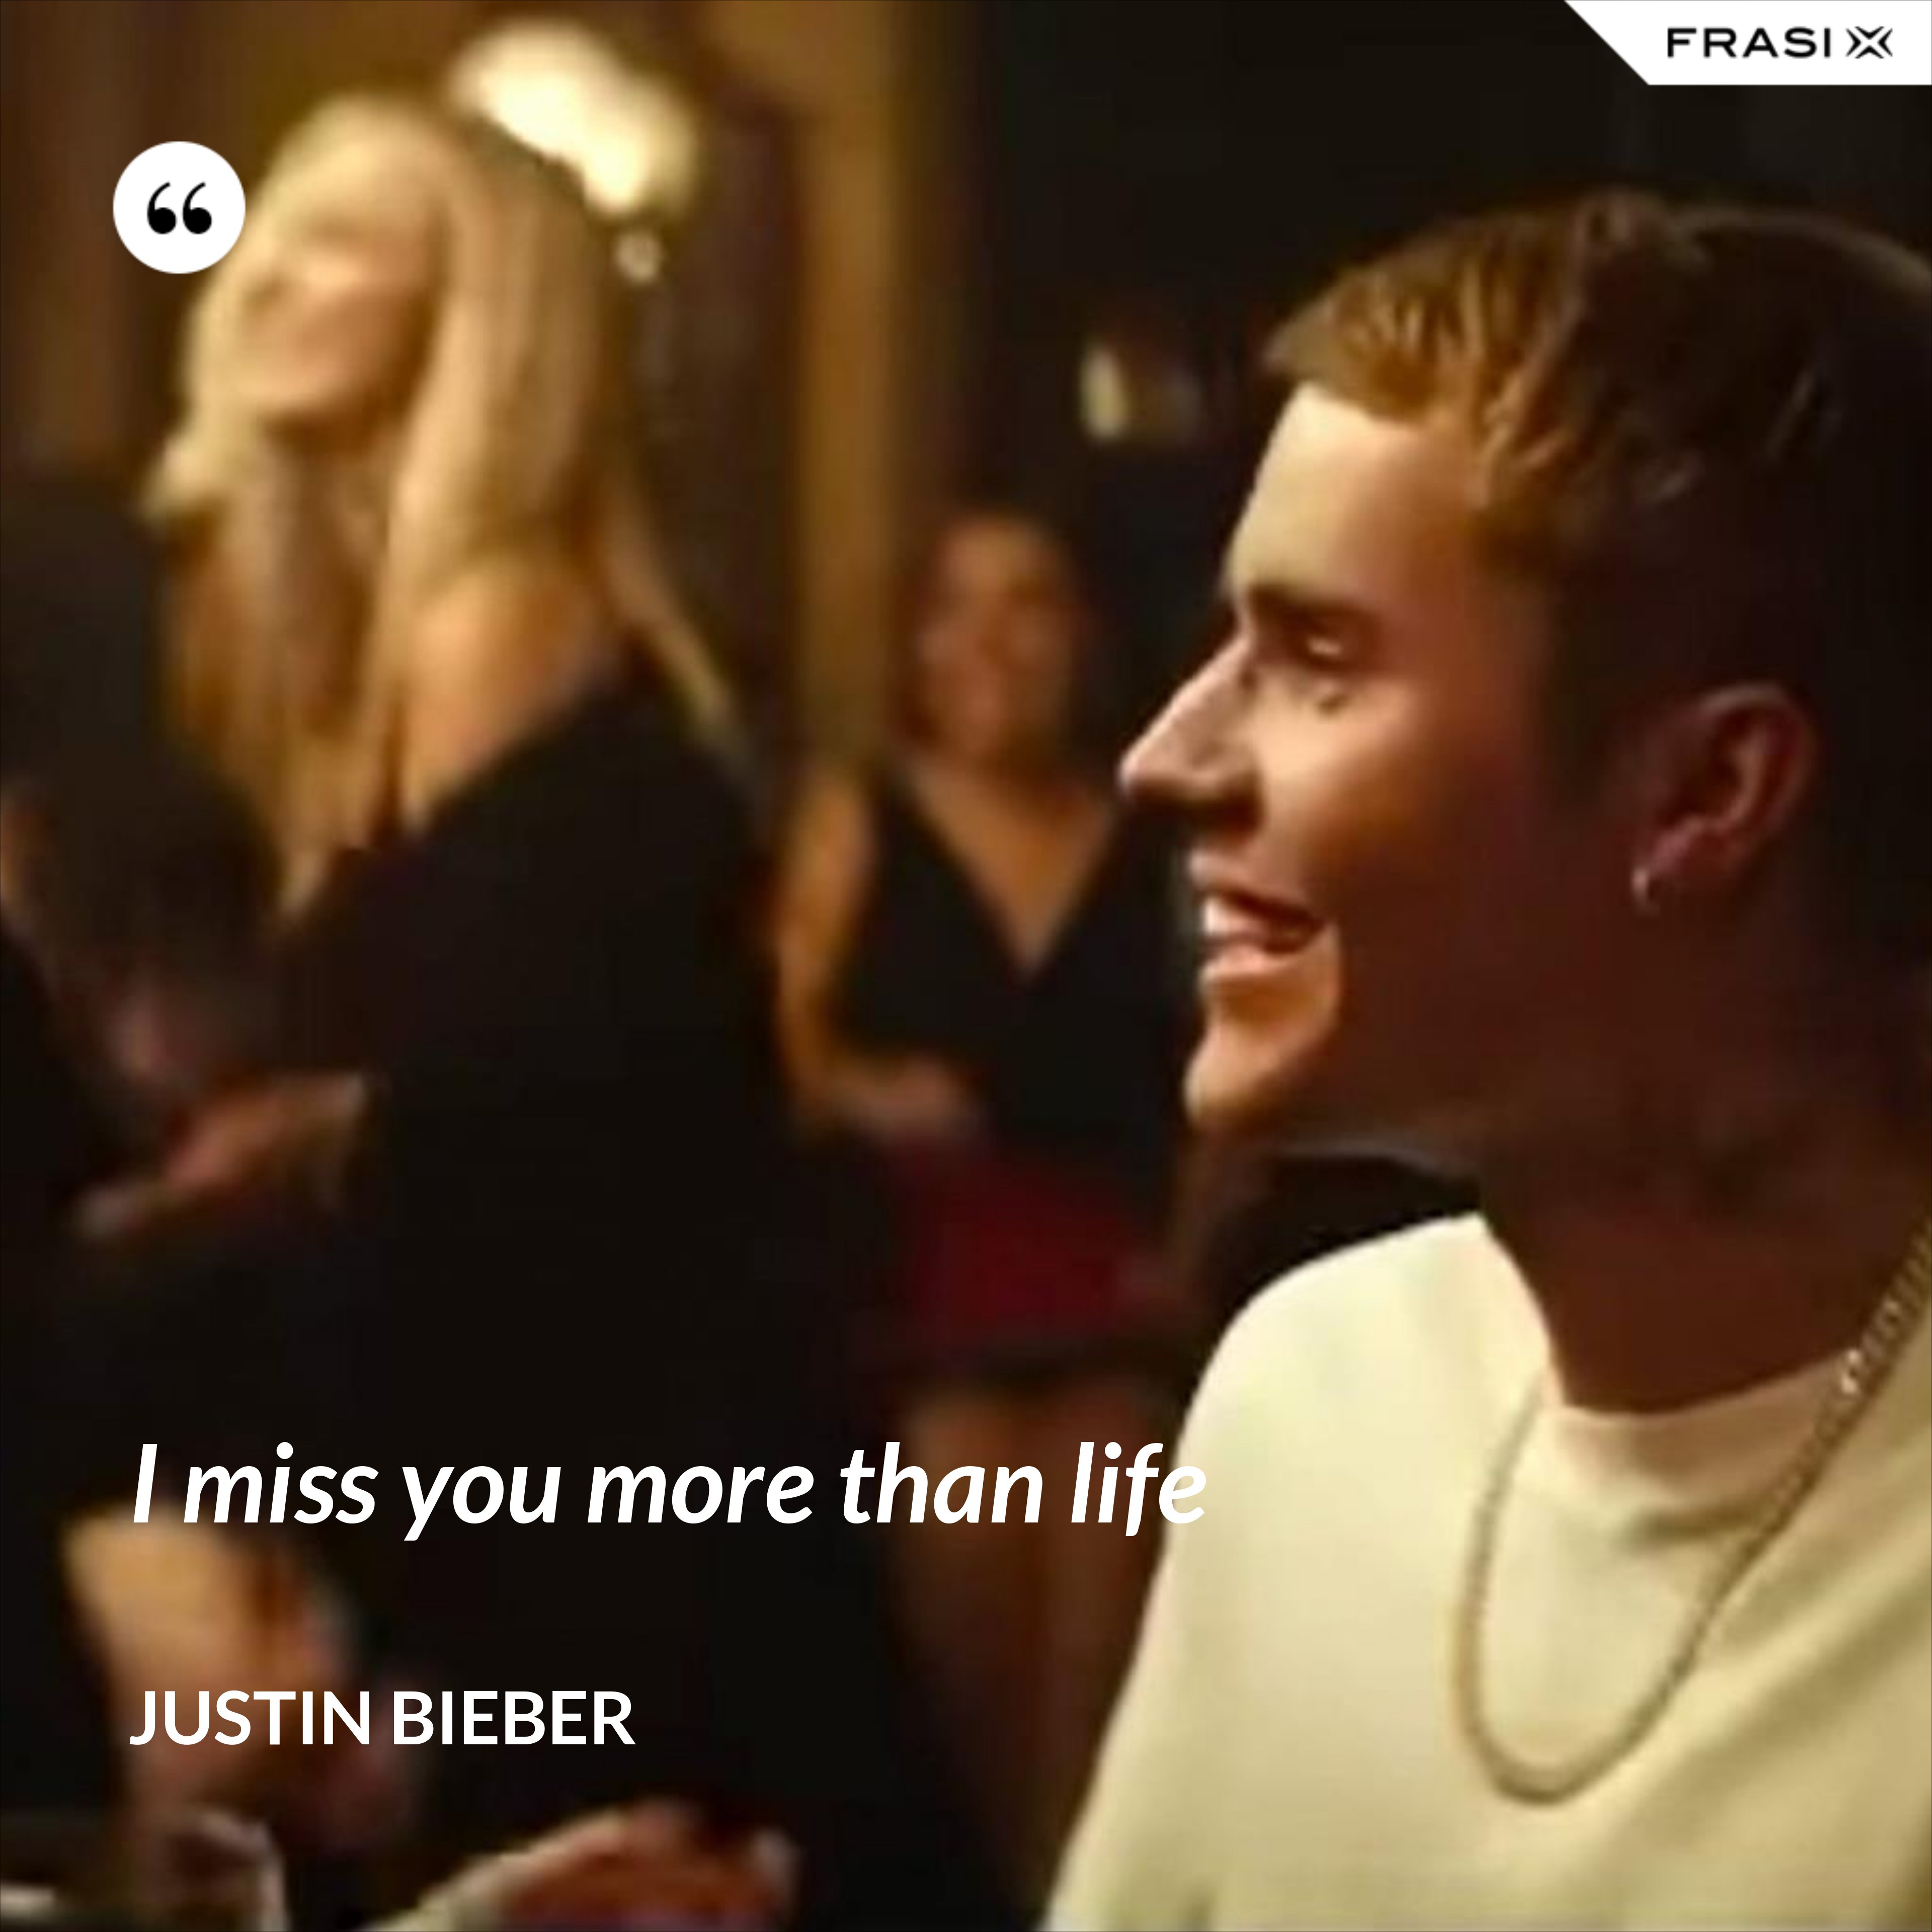 I miss you more than life - Justin Bieber